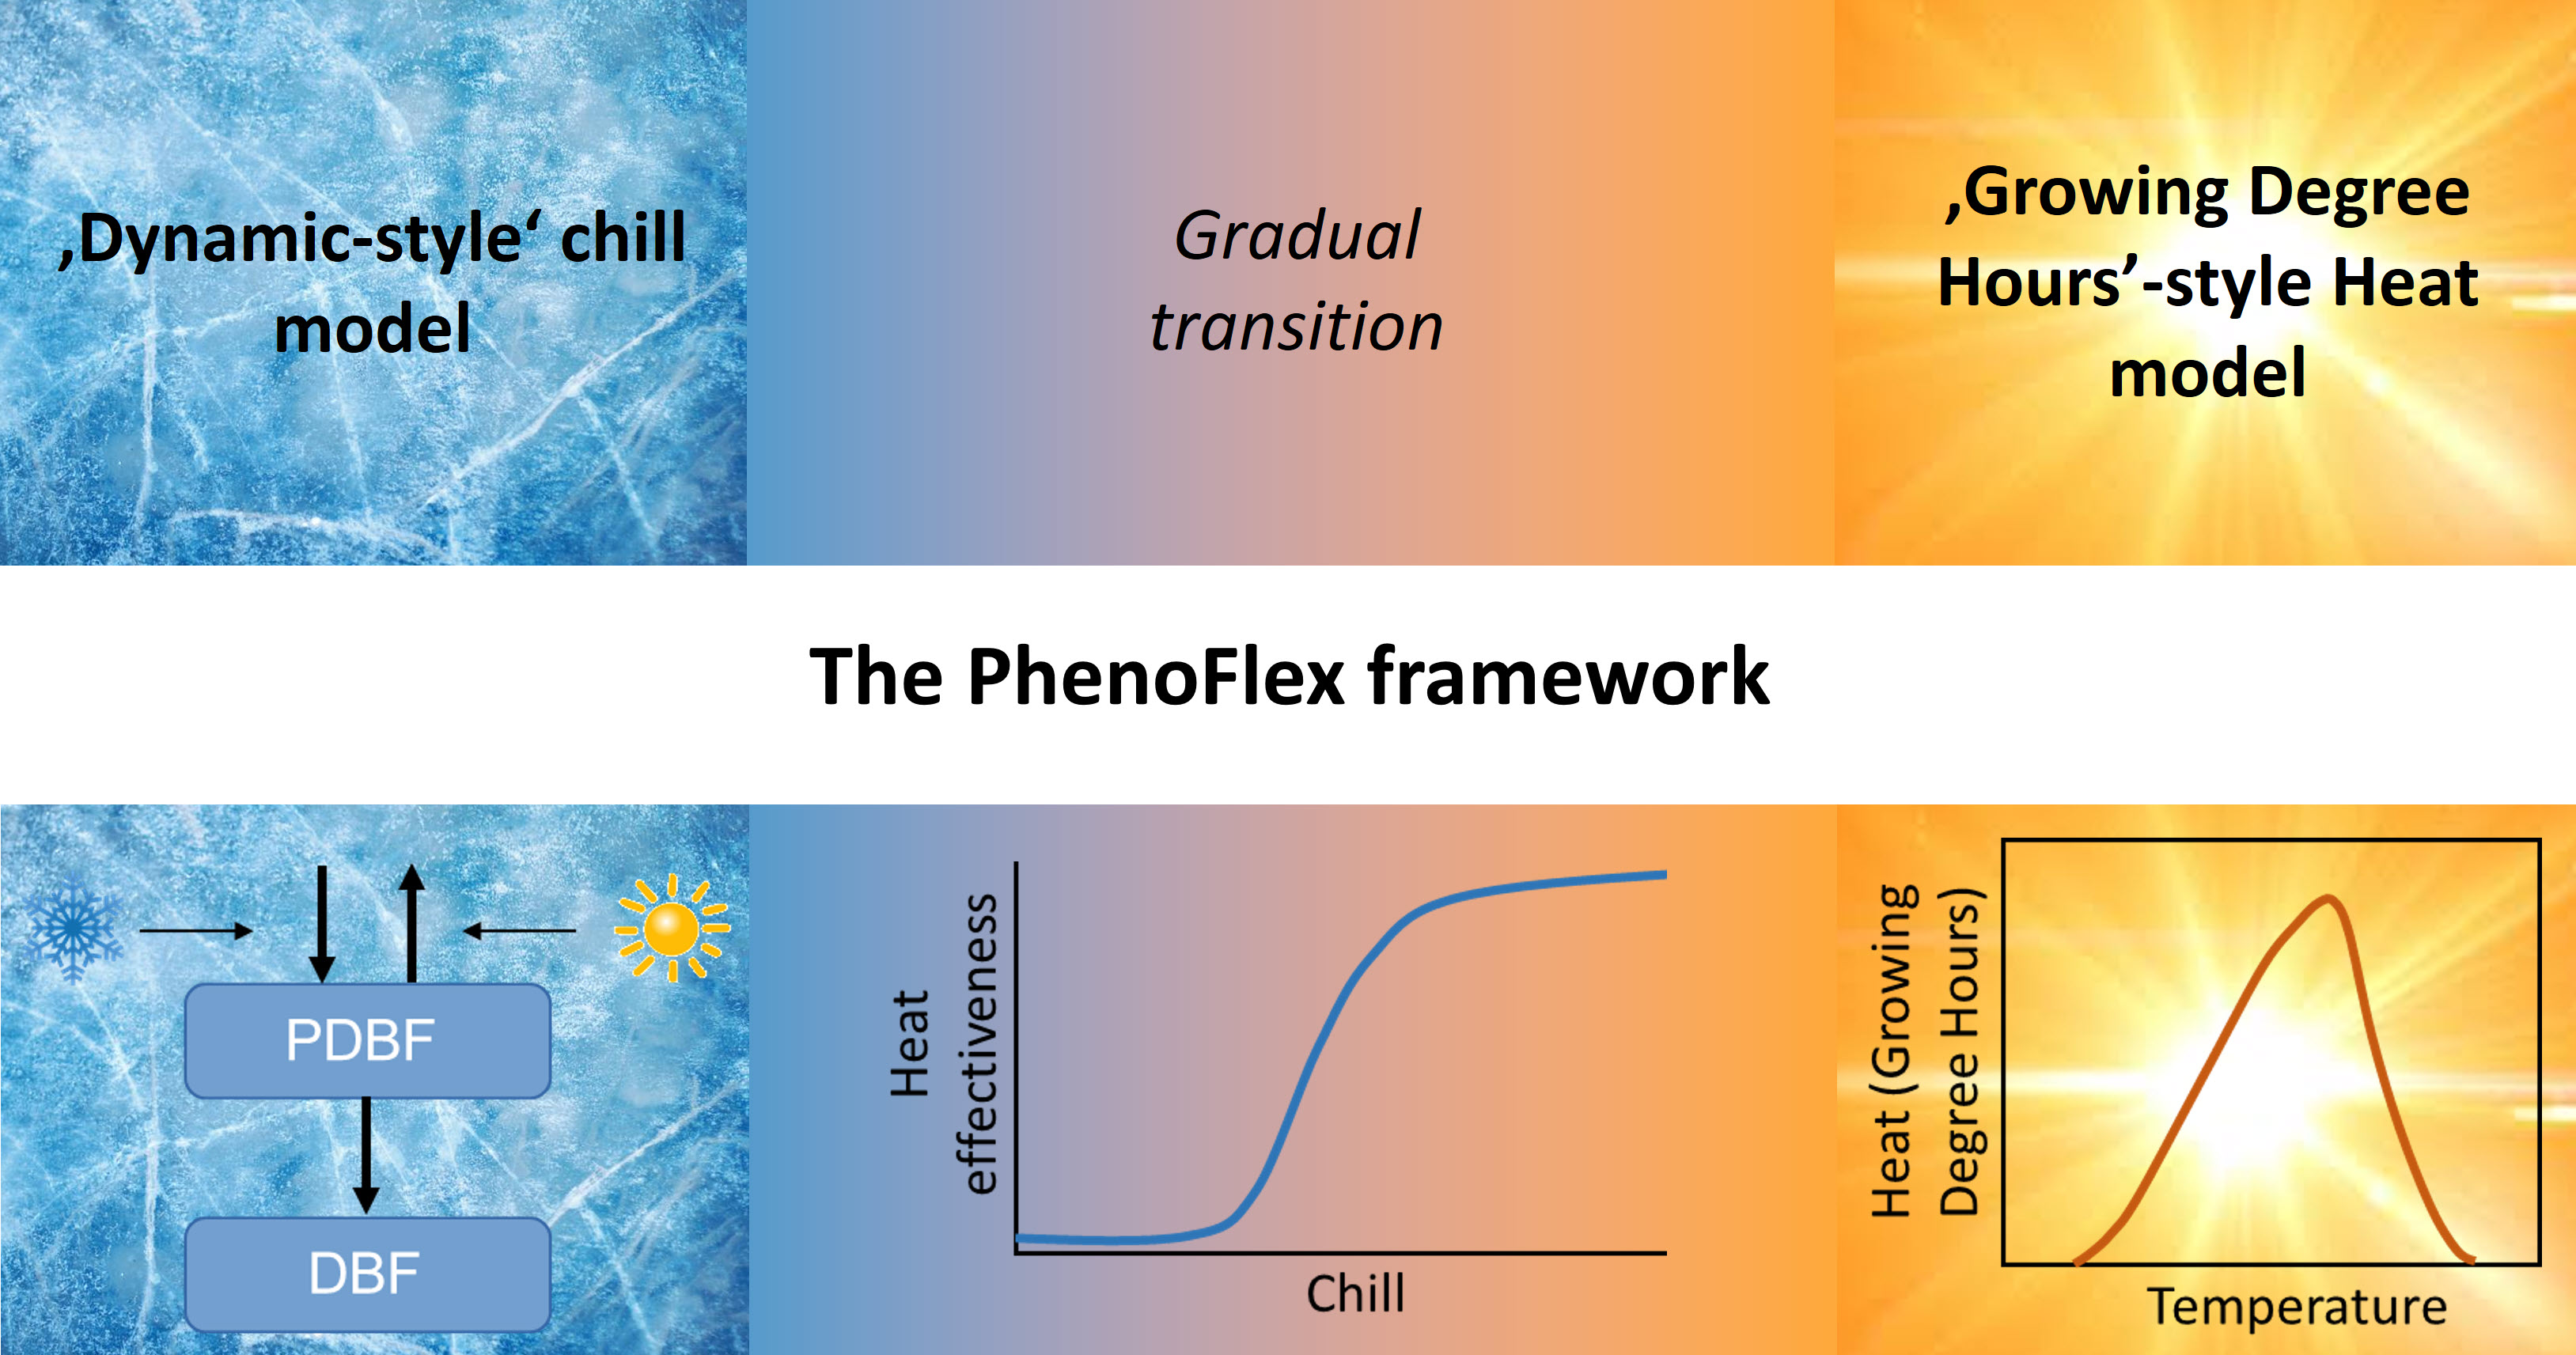 Schematic overview of the PhenoFlex modeling framework